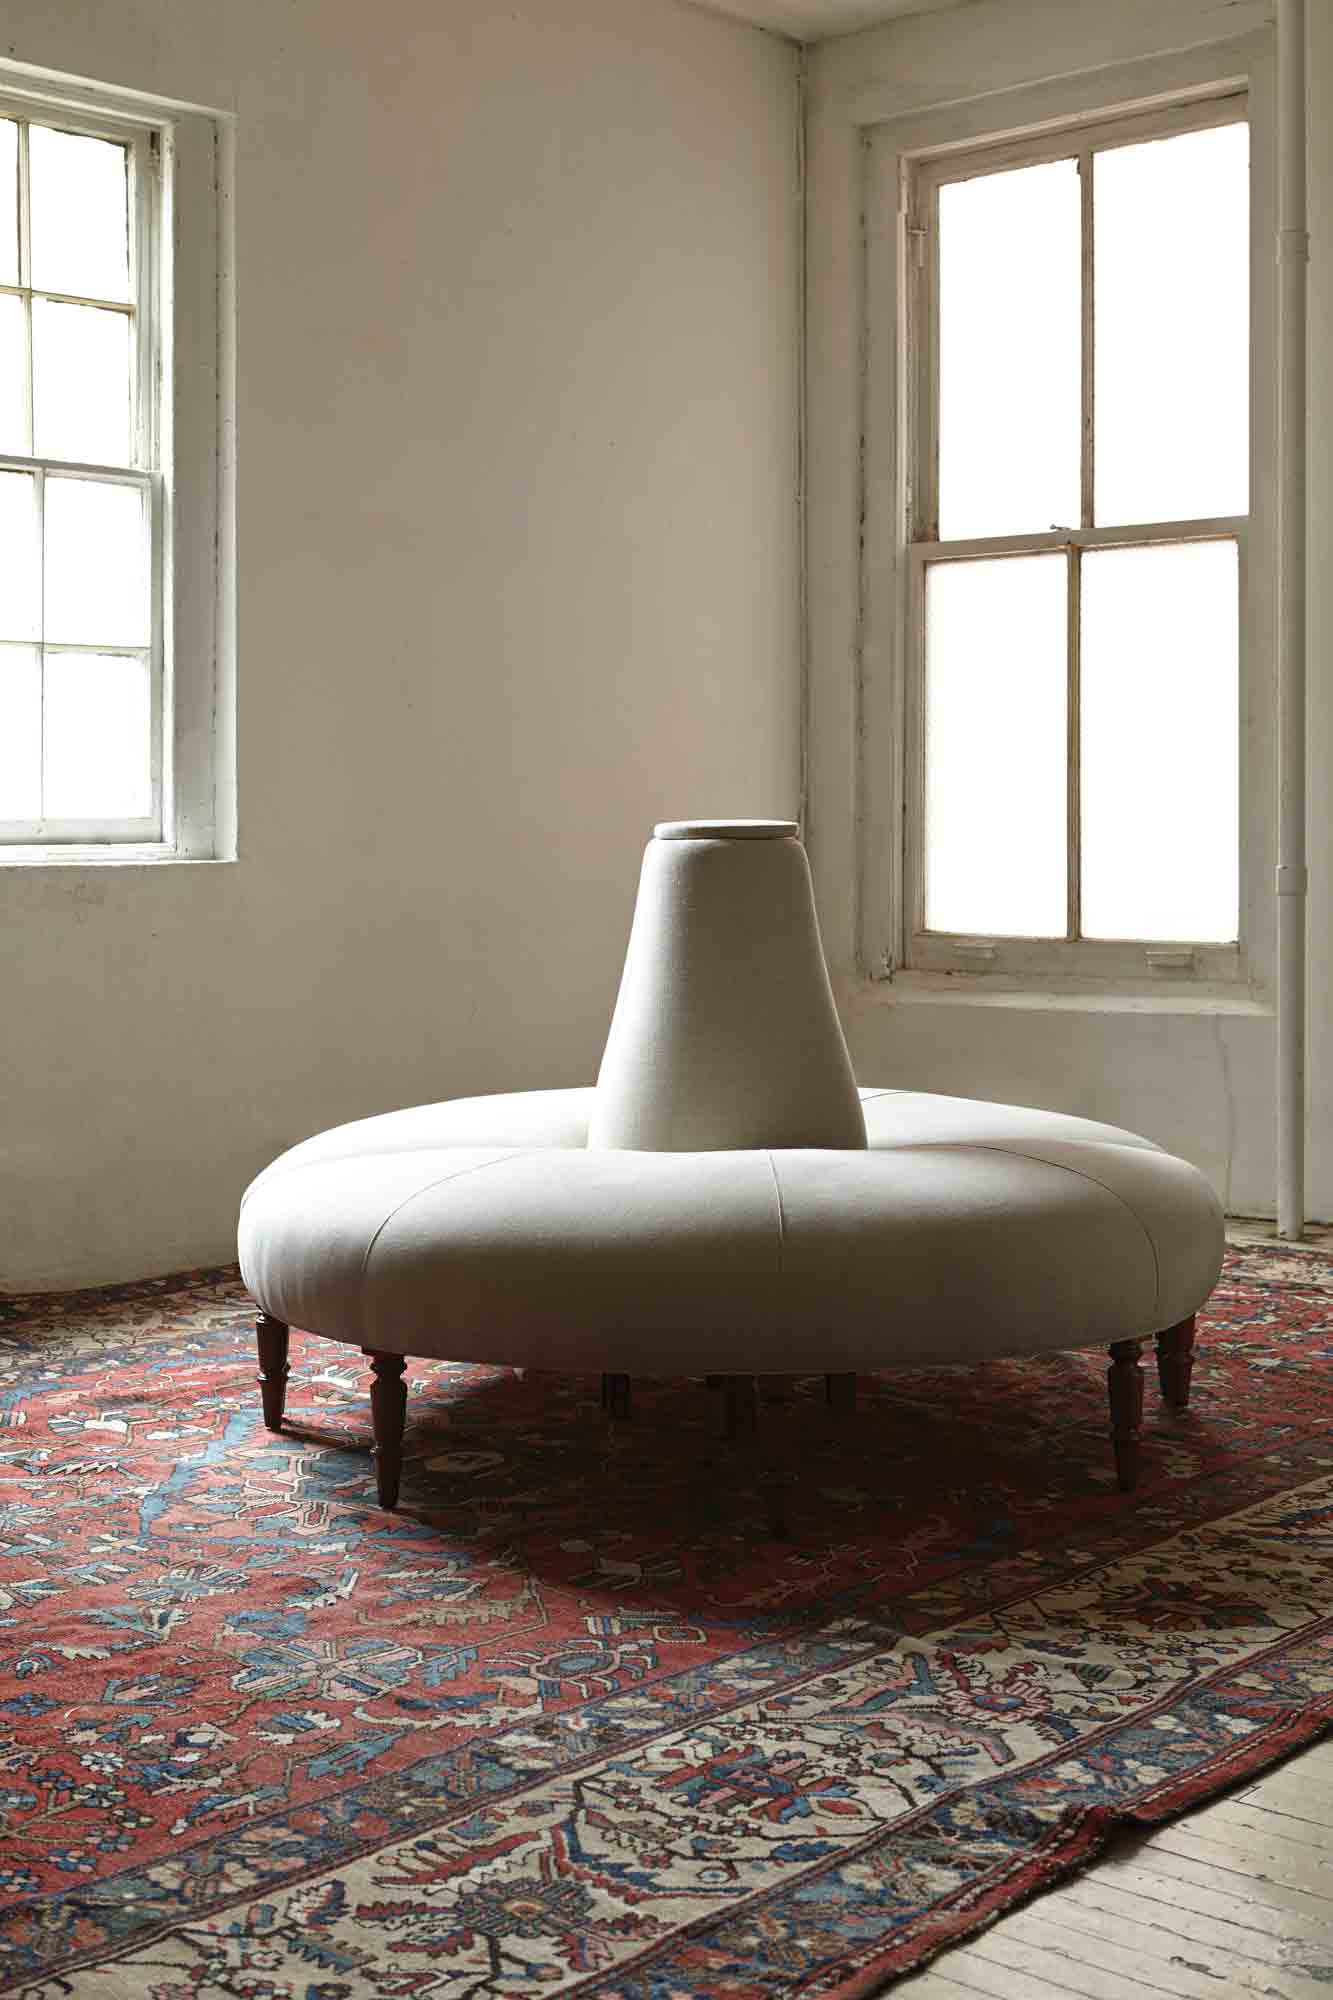  Round light colored sofa in a room with daylight coming through 2 windows, on a red rug with patterns. Photographed in Vintage Flax. 